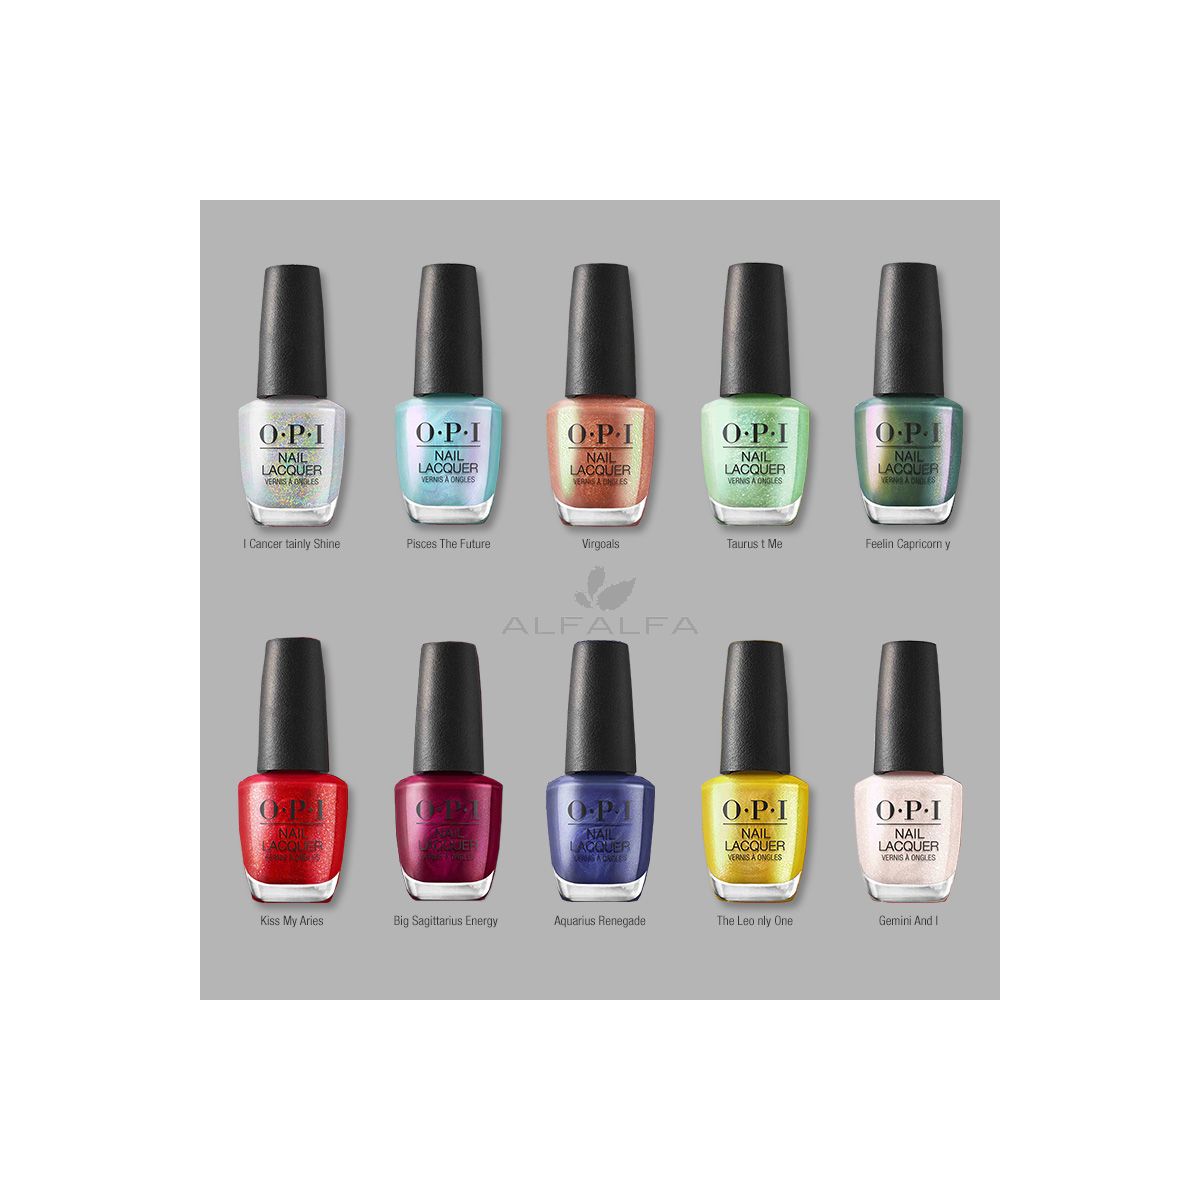 OPI Fall 2023 Big Zodiac Energy Lacquer Collection